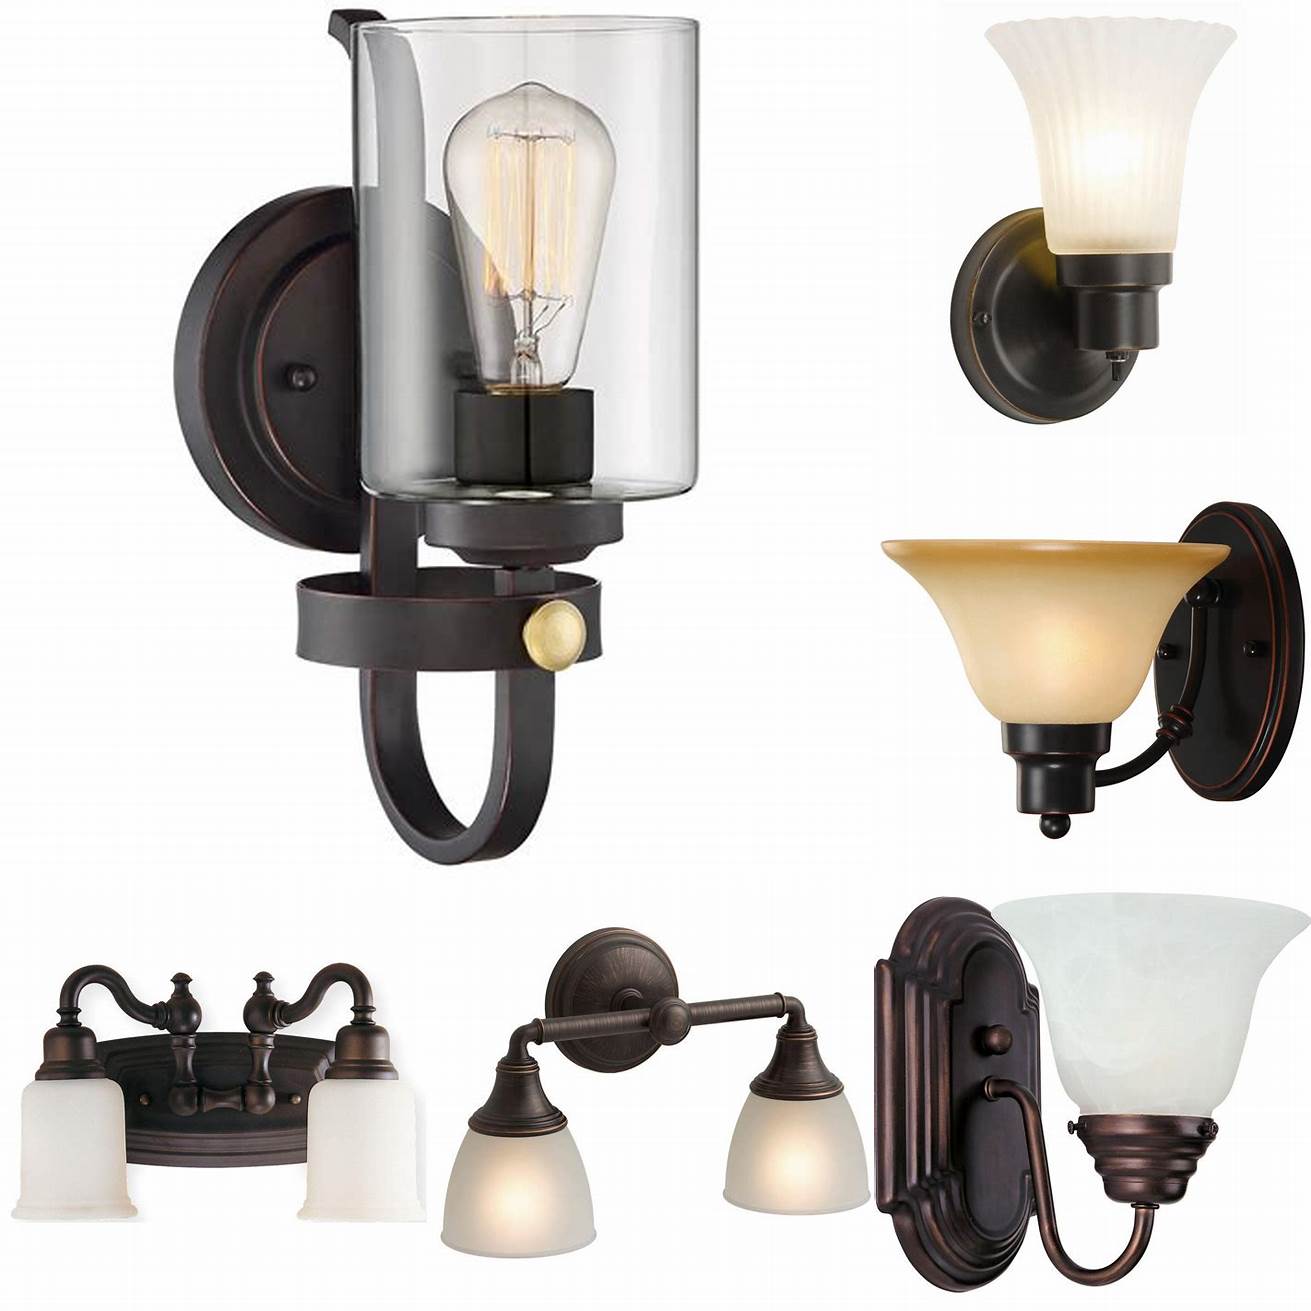 This oil rubbed bronze sconce-style vanity light is perfect for smaller bathrooms or as an accent light